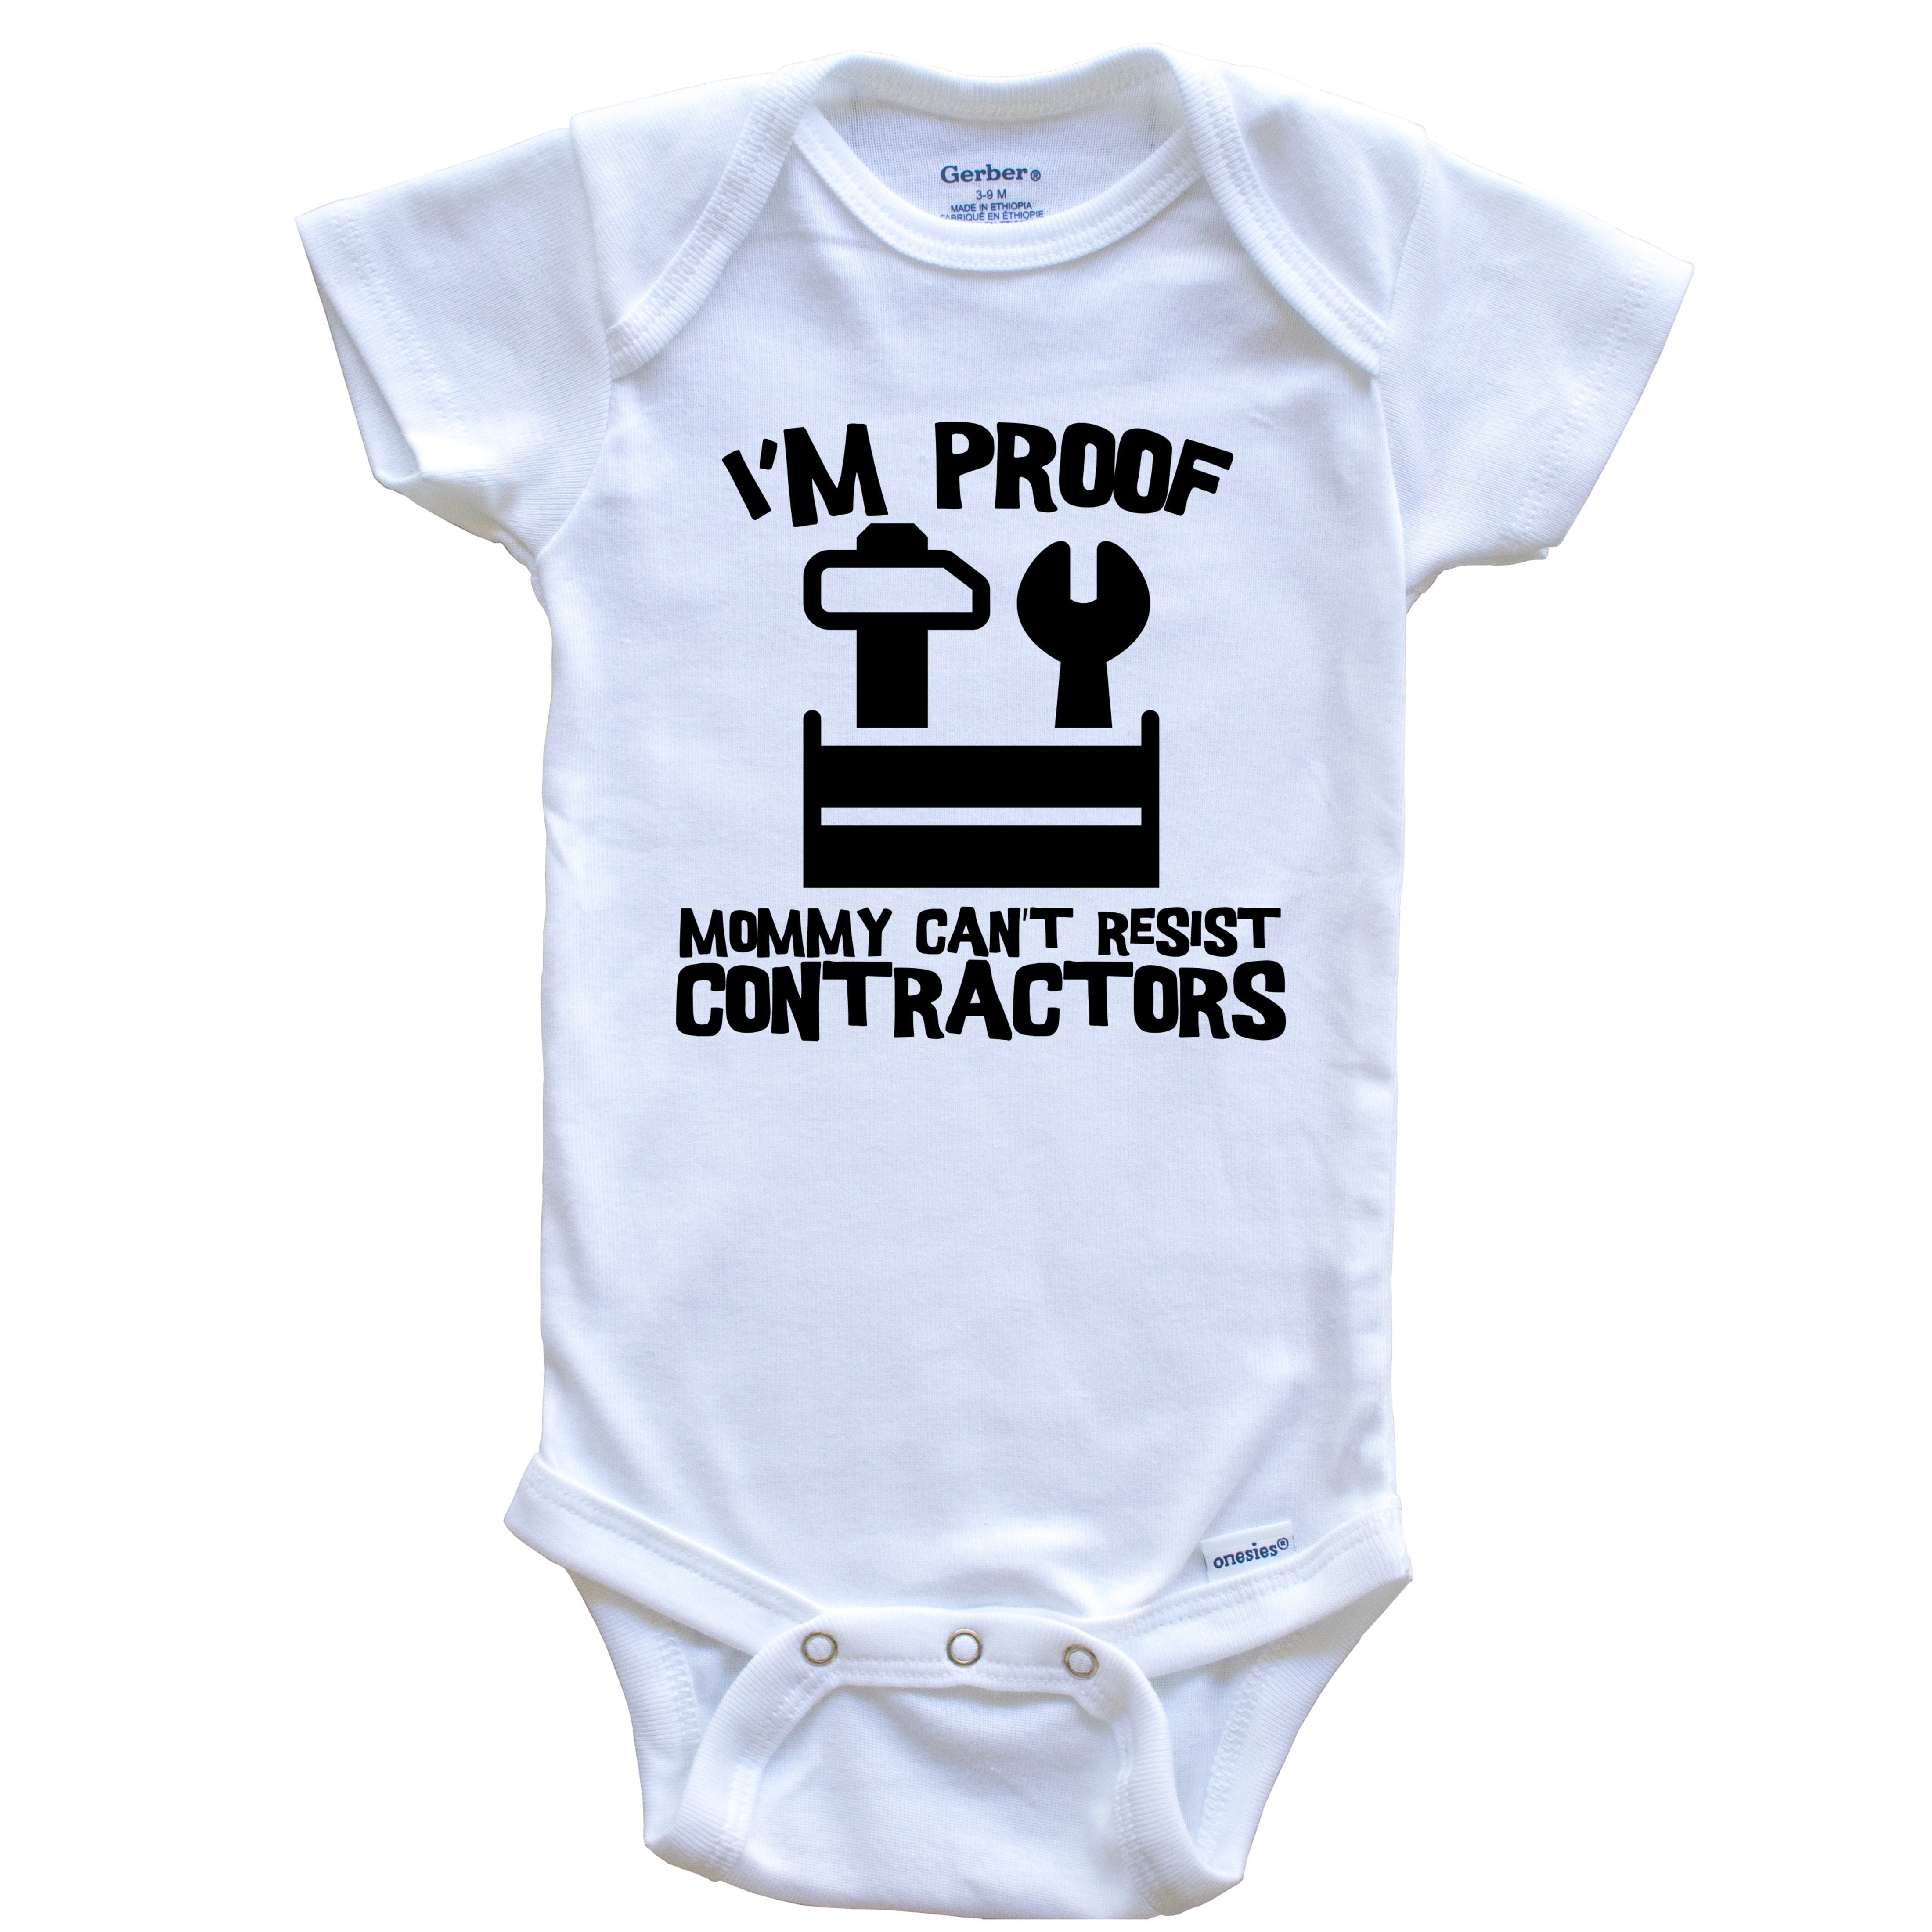 Funny Fishing Onesie - I'm Proof Mommy Can't Resist Fishermen Baby Bodysuit 3-6 Months / White